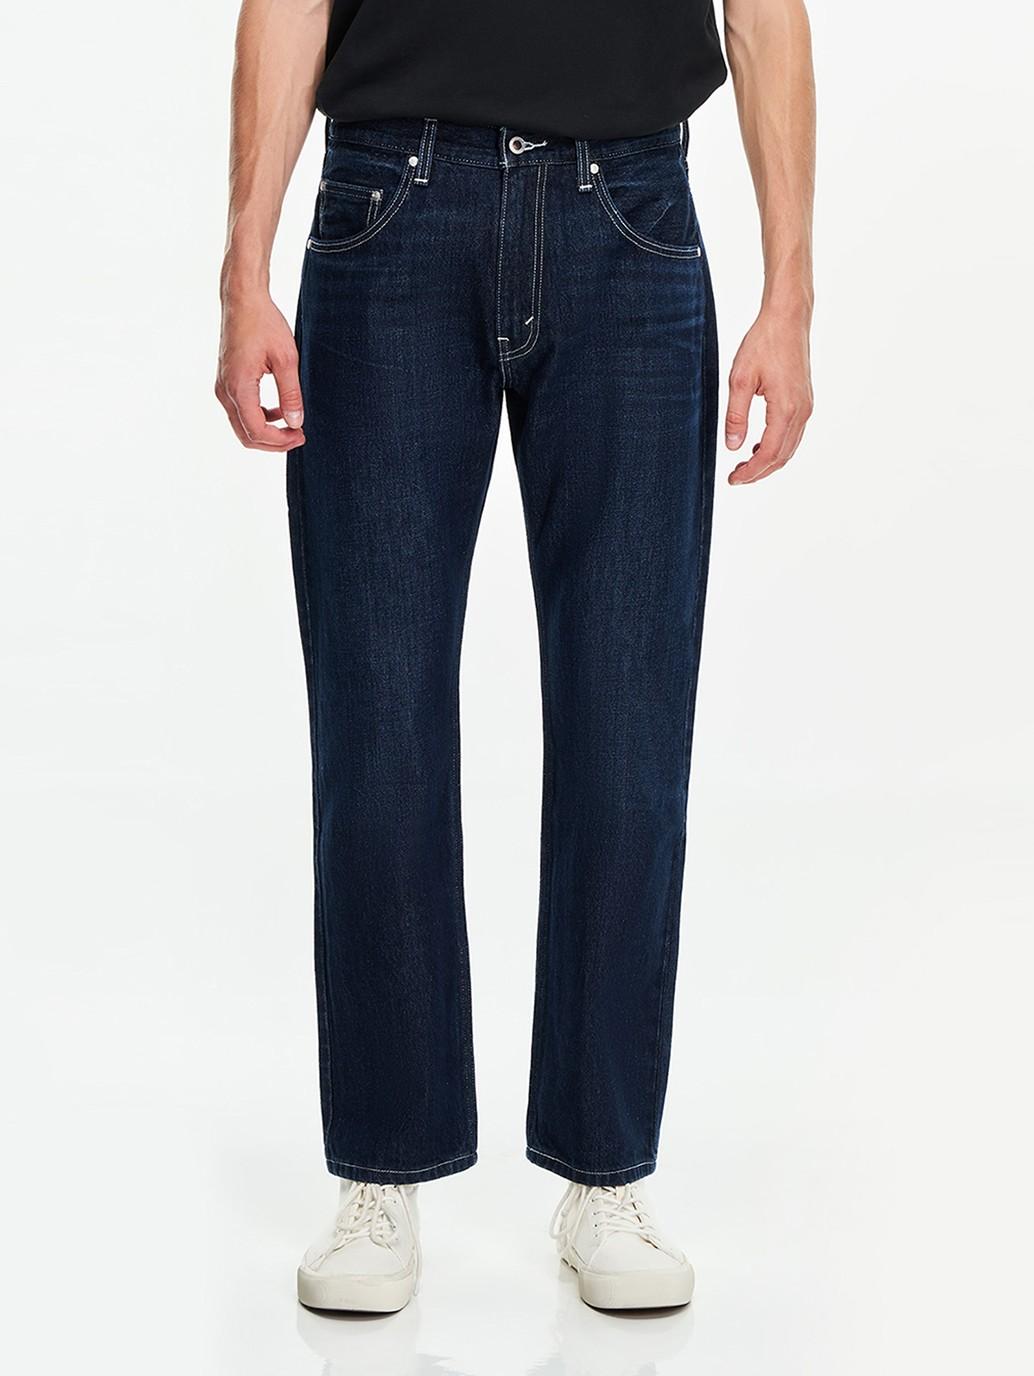 Buy Levi's® Men's SilverTab Straight | Levi's® Official Online Store SG